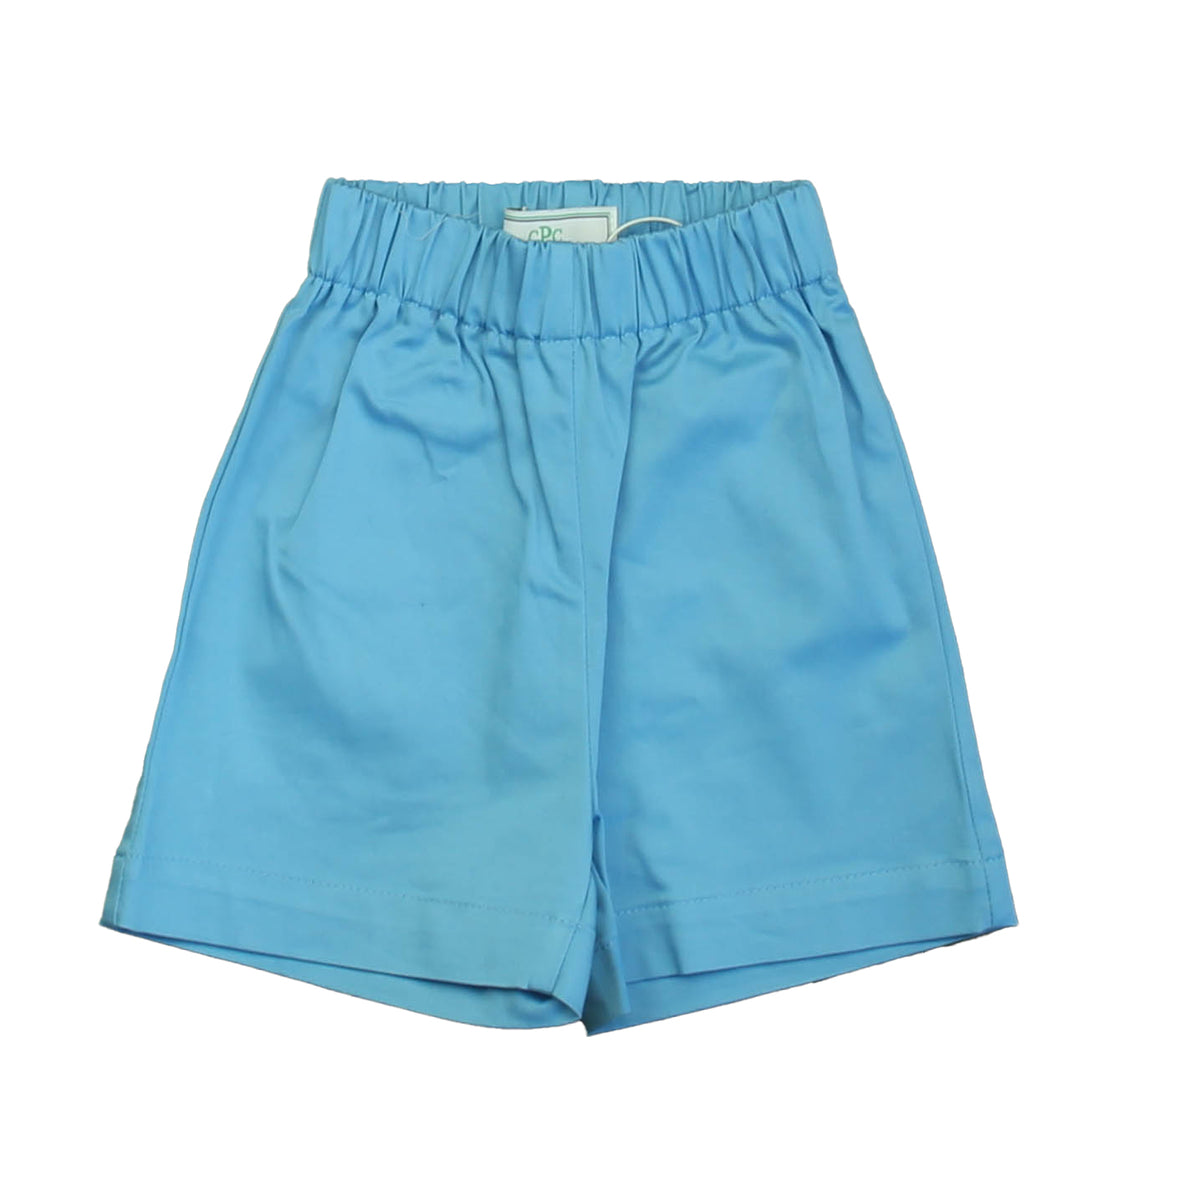 New with Tags: Robins Egg Blue Shorts -- FINAL SALE